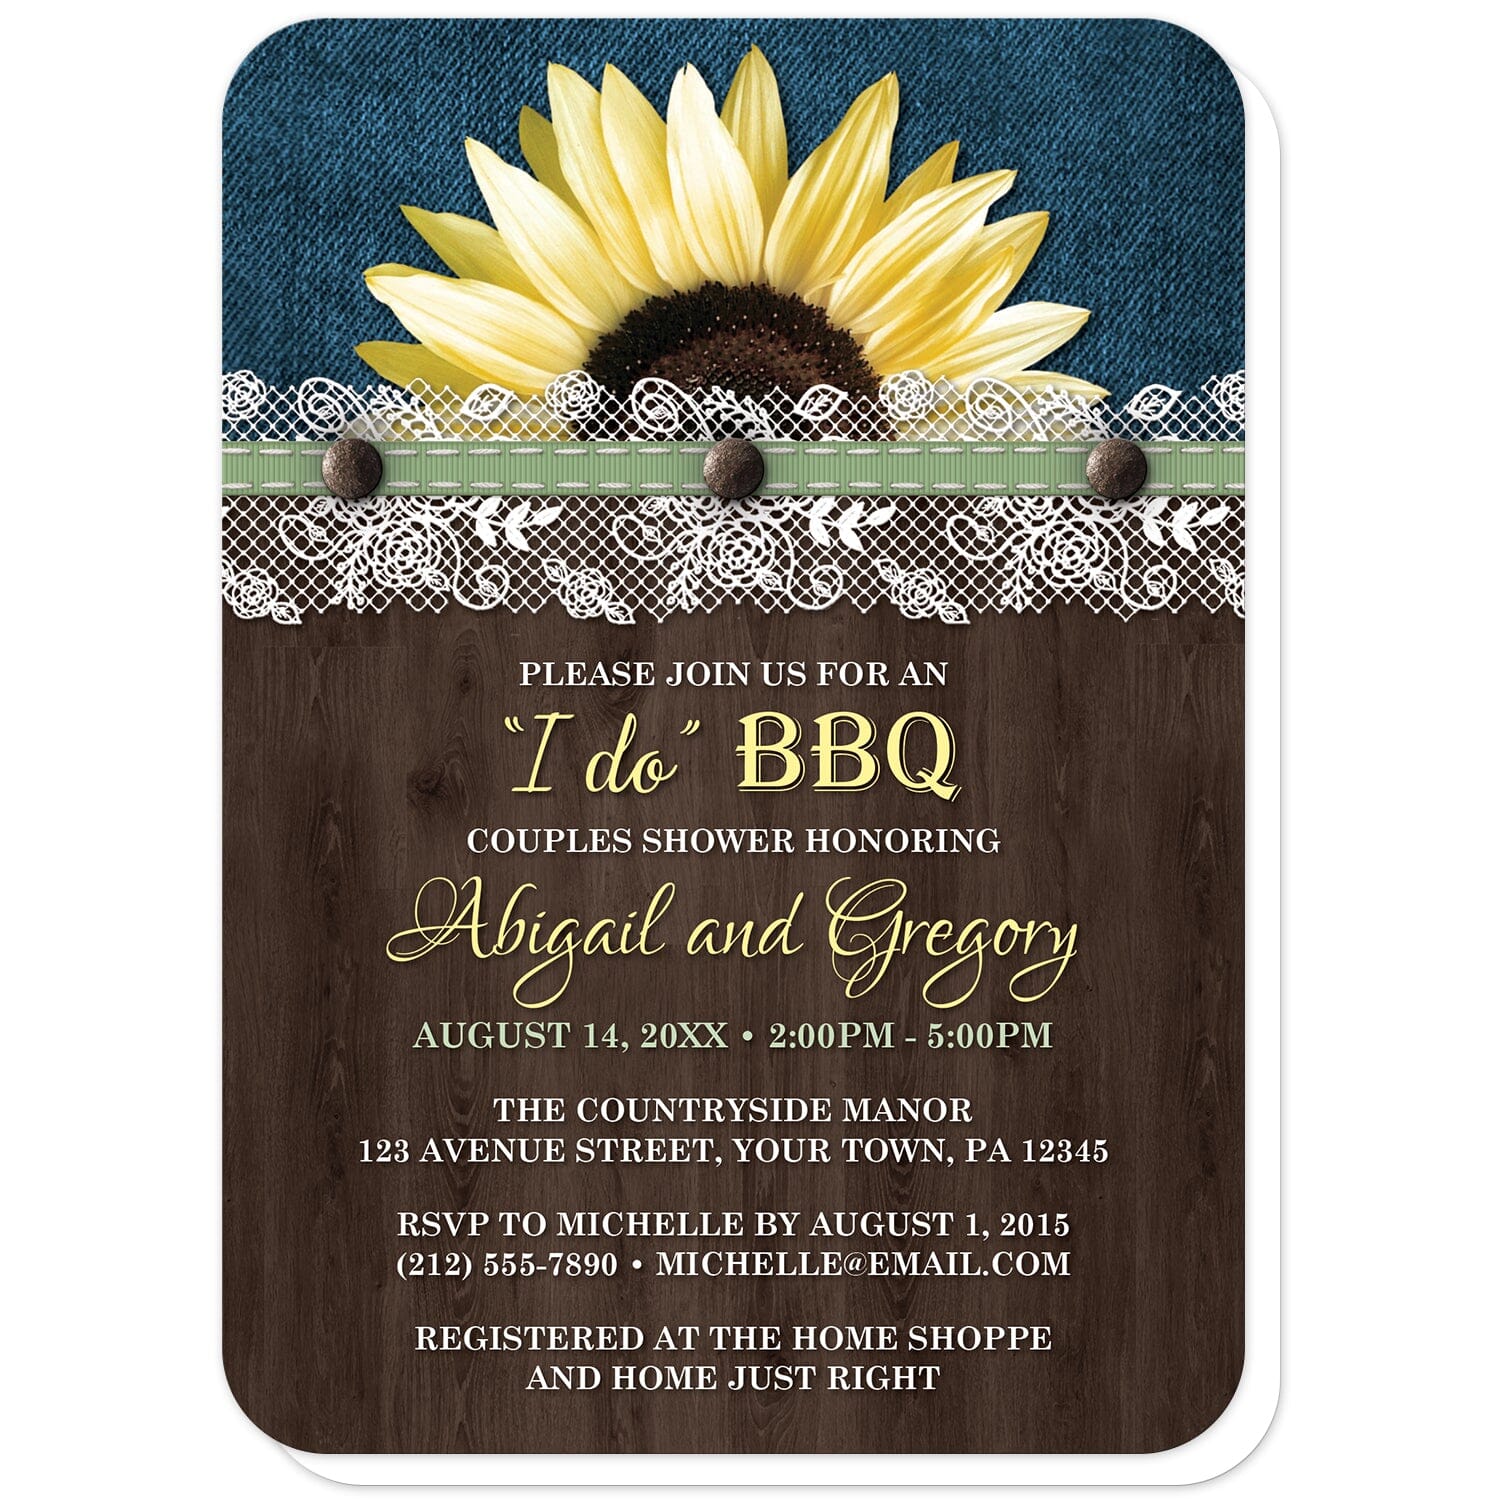 Sunflower Denim Wood Lace I Do BBQ Couples Shower Invitations (with rounded corners) at Artistically Invited. Rustic sunflower denim wood lace 'I Do' BBQ couples shower invitations with a vibrant yellow sunflower with a white lace and green ribbon illustration over blue denim along the top. Your personalized couples shower celebration details are custom printed in yellow, green, and white over a dark brown wood background below the sunflower. 